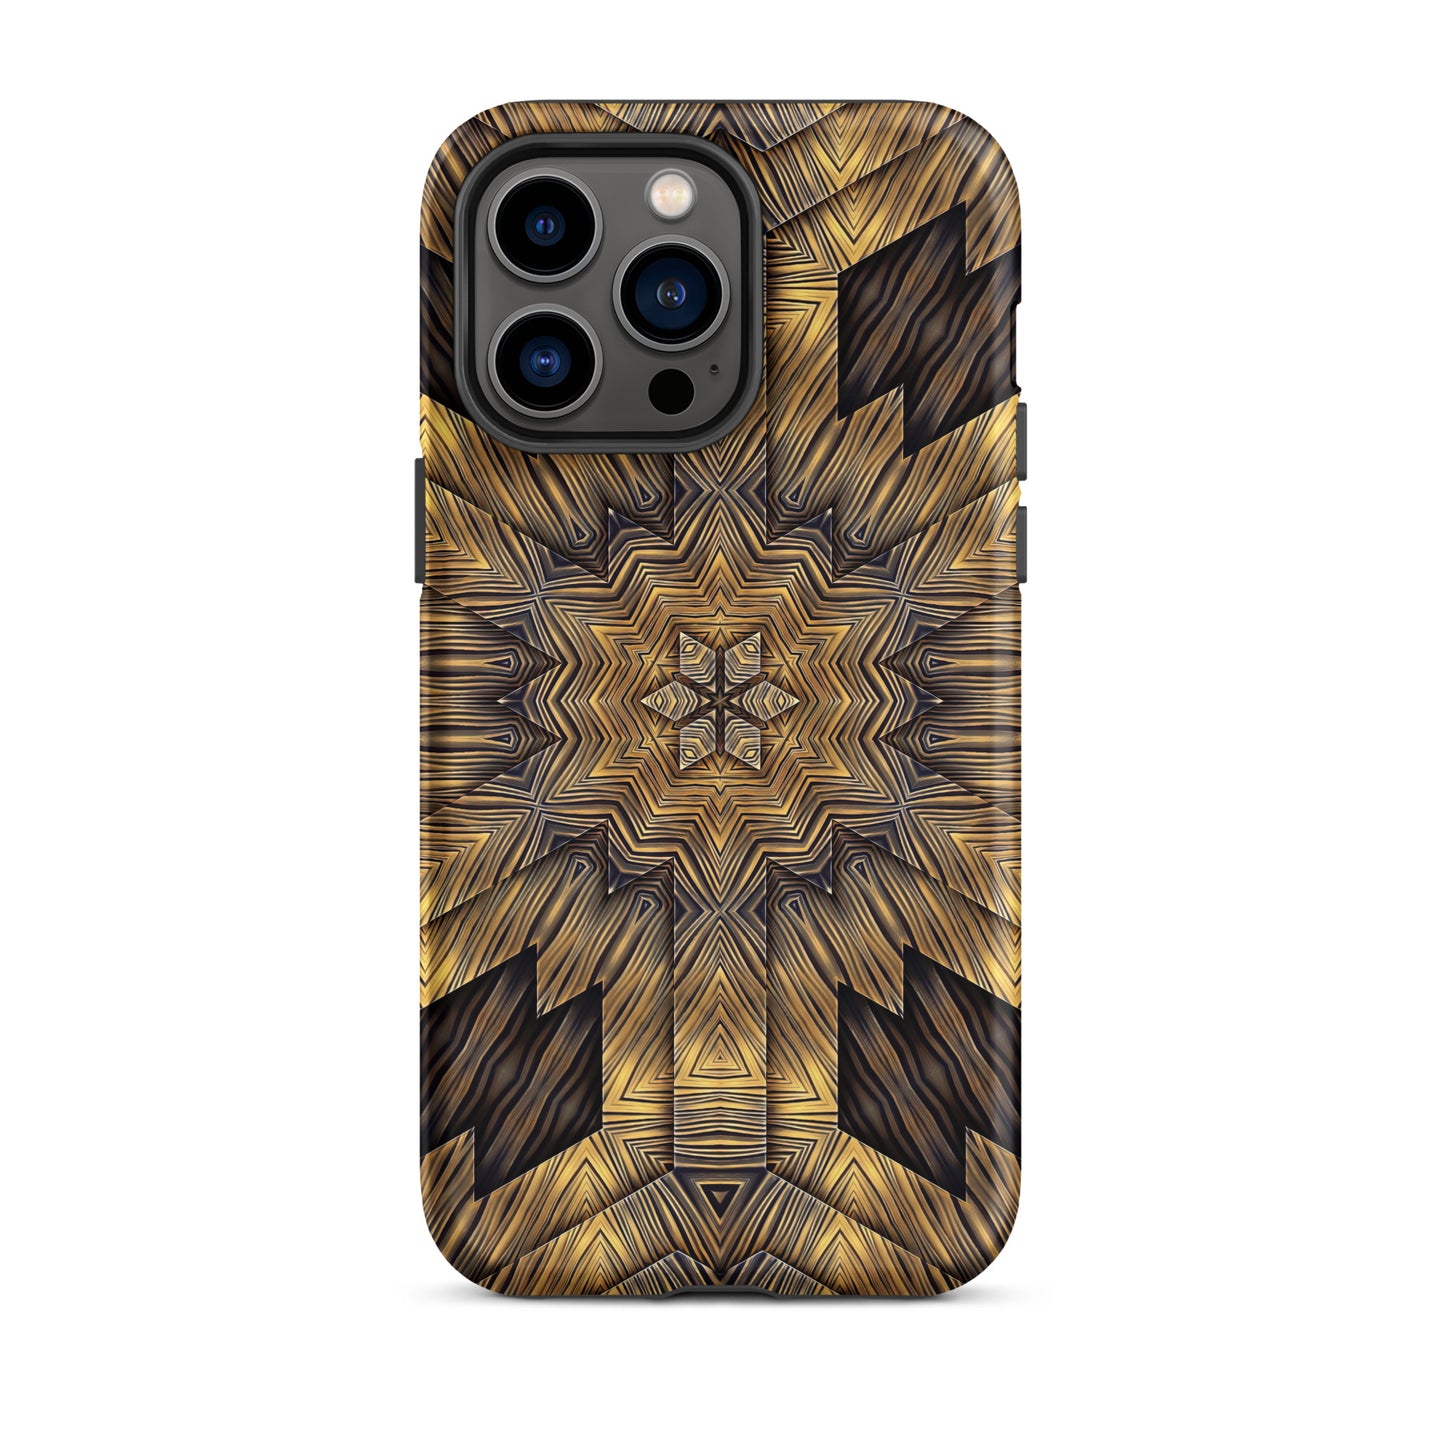 "You Wood Say That" Tough iPhone case